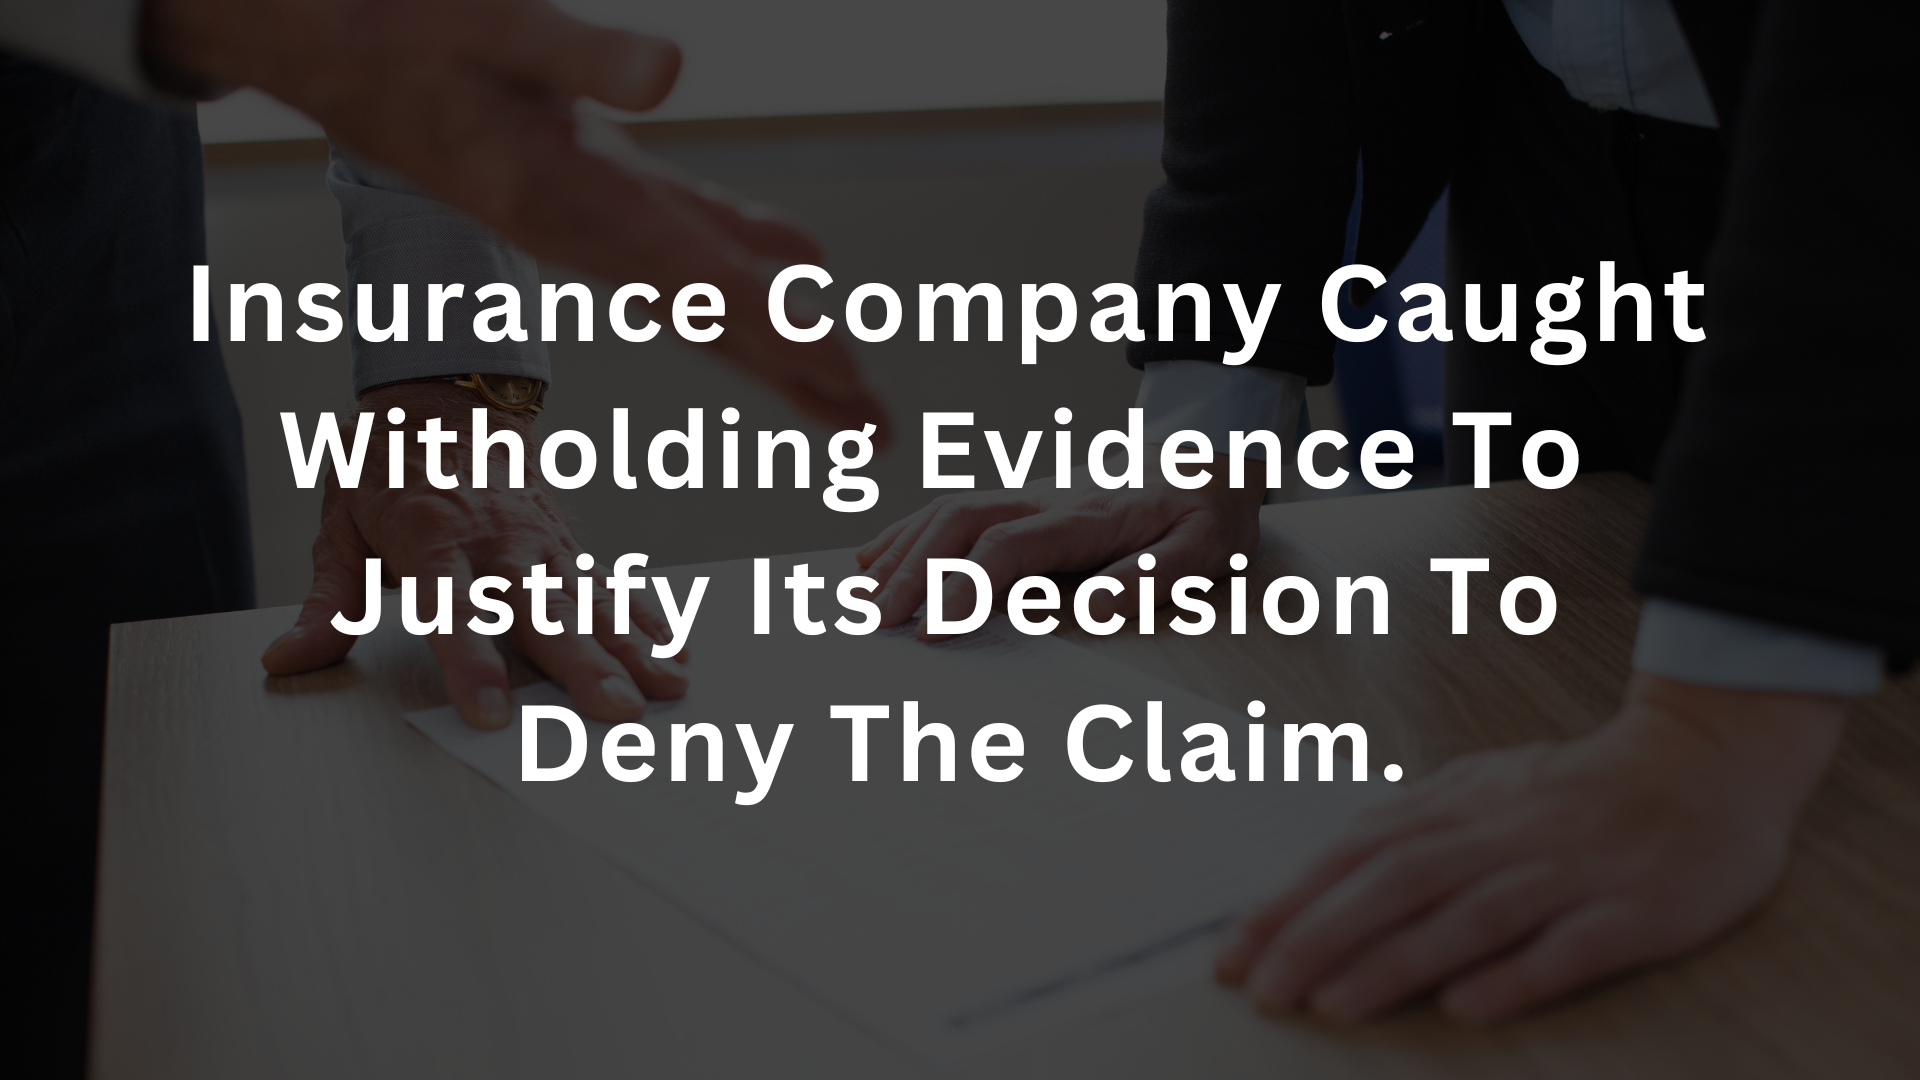 INSURANCE COMPANY CAUGHT WITHHOLDING EVIDENCE TO JUSTIFY ITS DECISION TO DENY THE CLAIM.